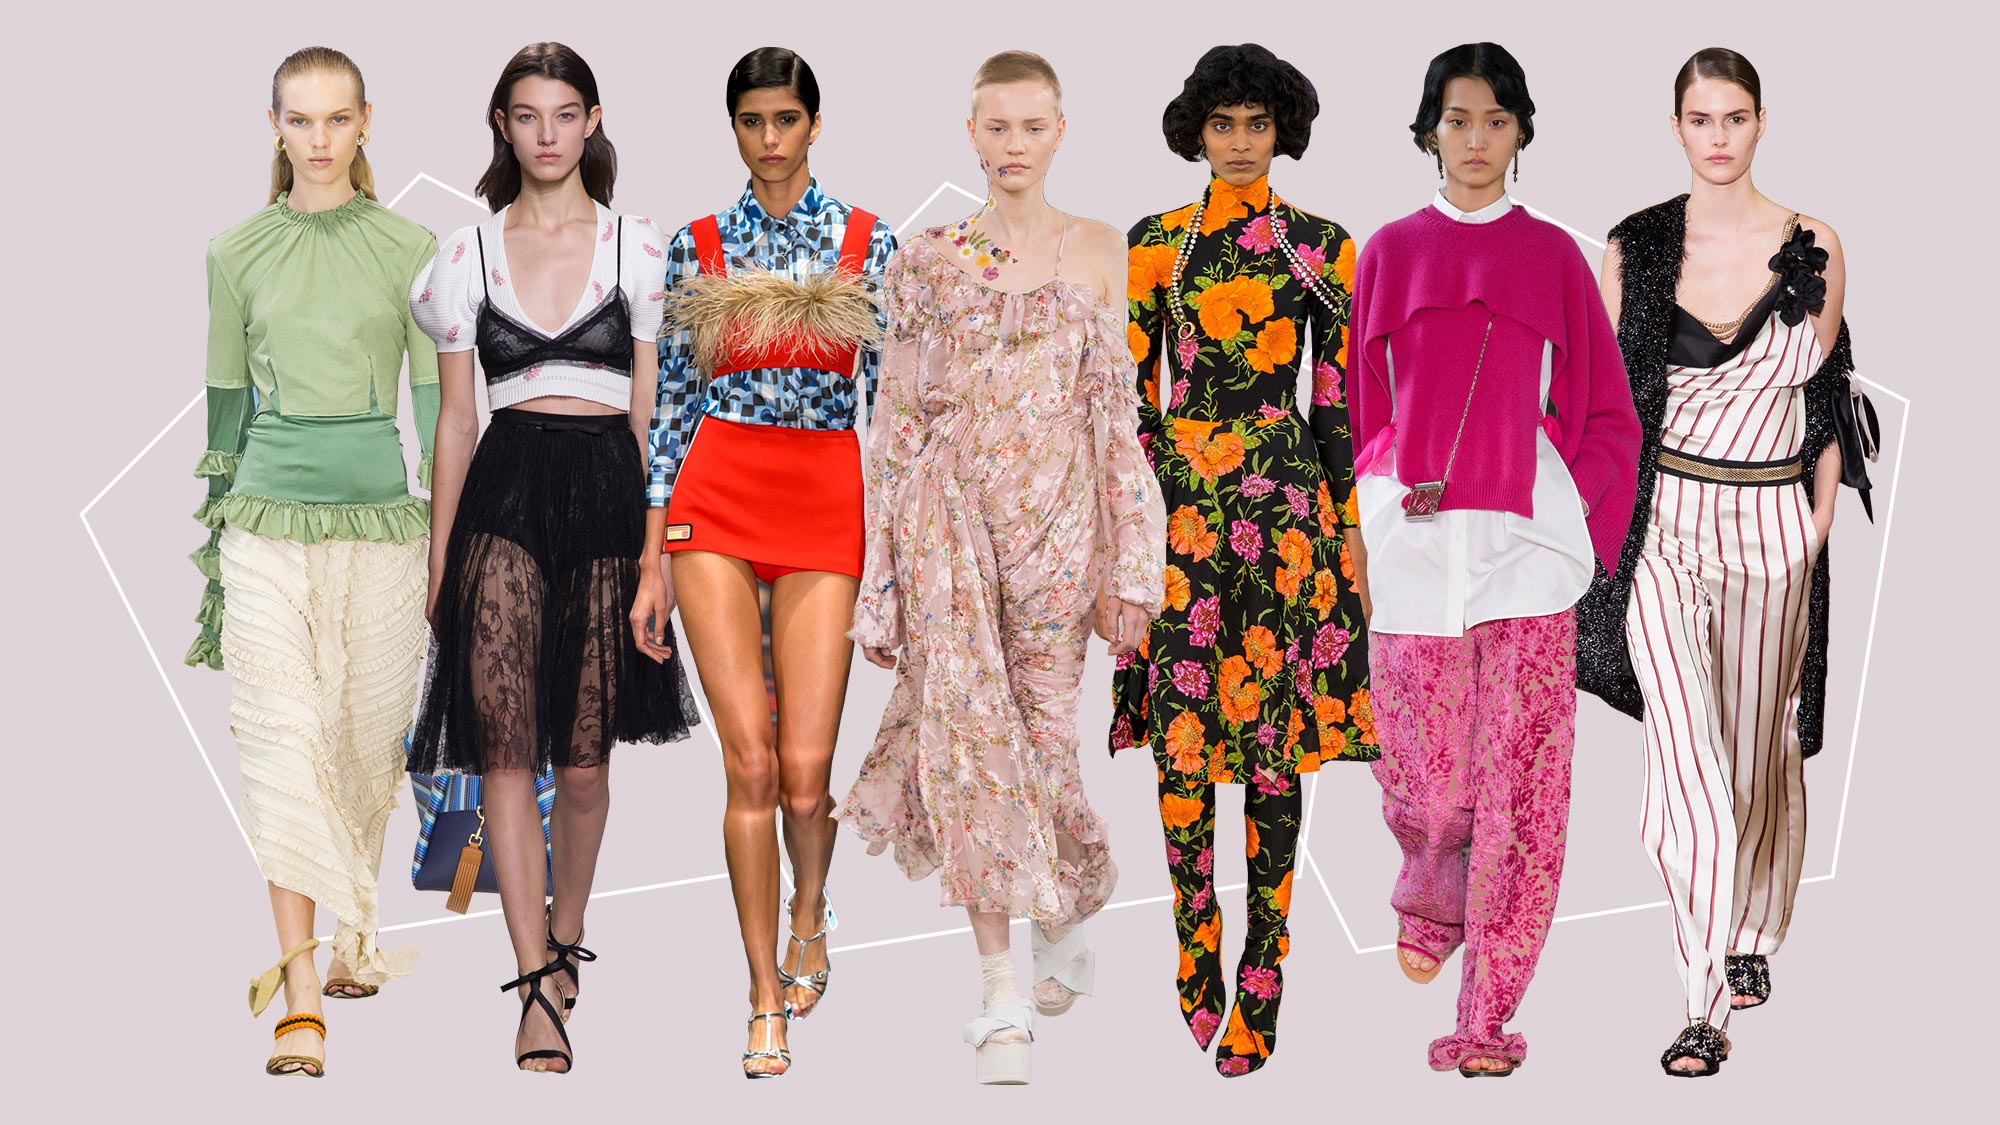 SS17 Fashion Trend Report: The Best Women's Fashion Trends For Summer | Claire UK